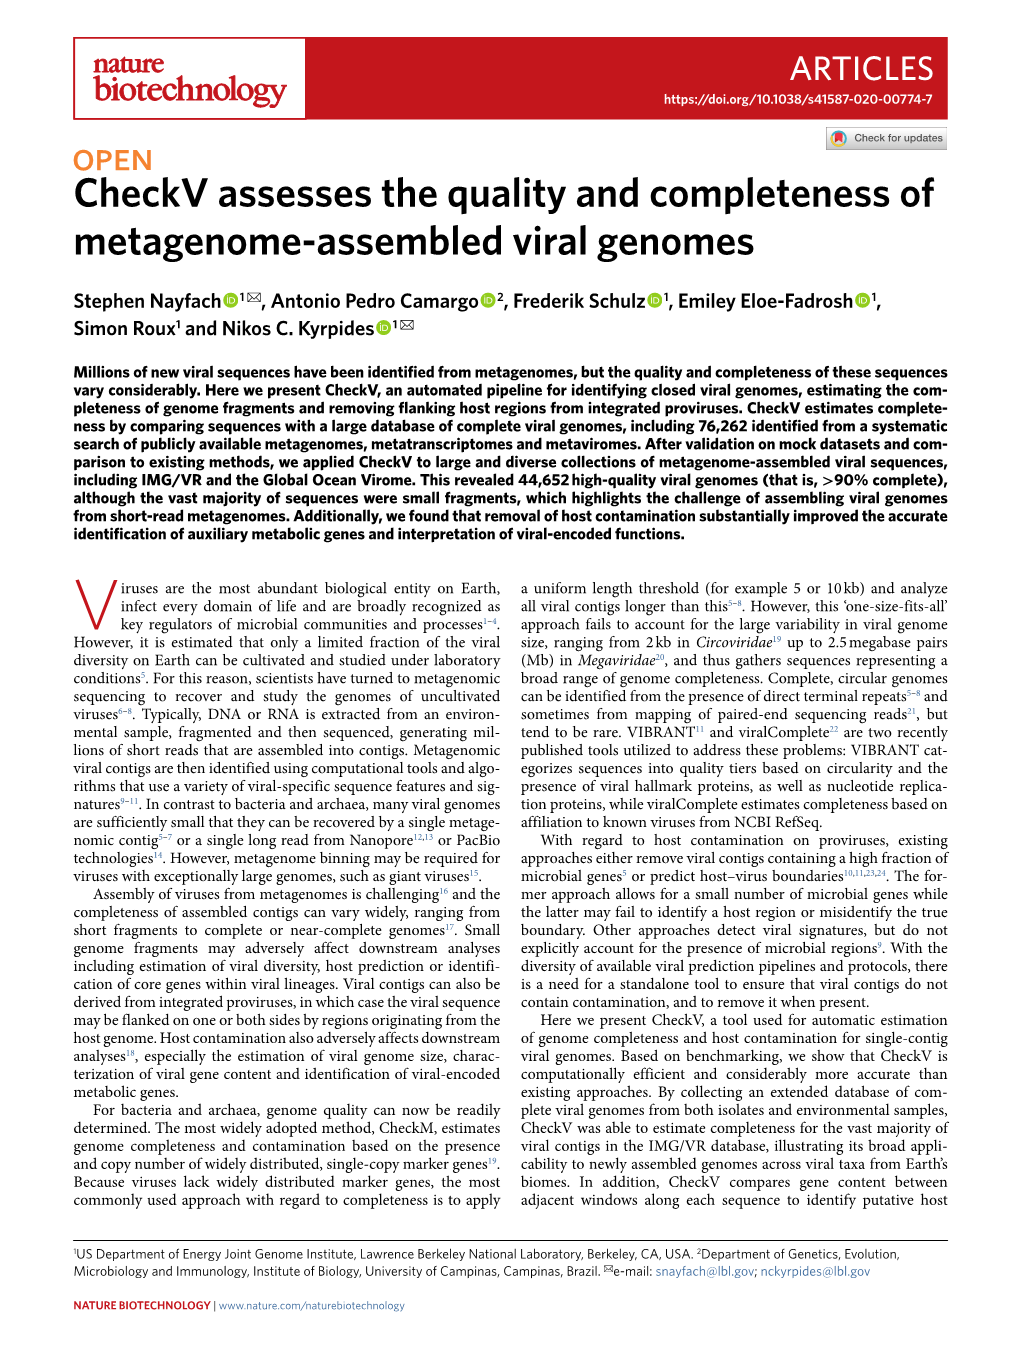 Checkv Assesses the Quality and Completeness of Metagenome-Assembled Viral Genomes